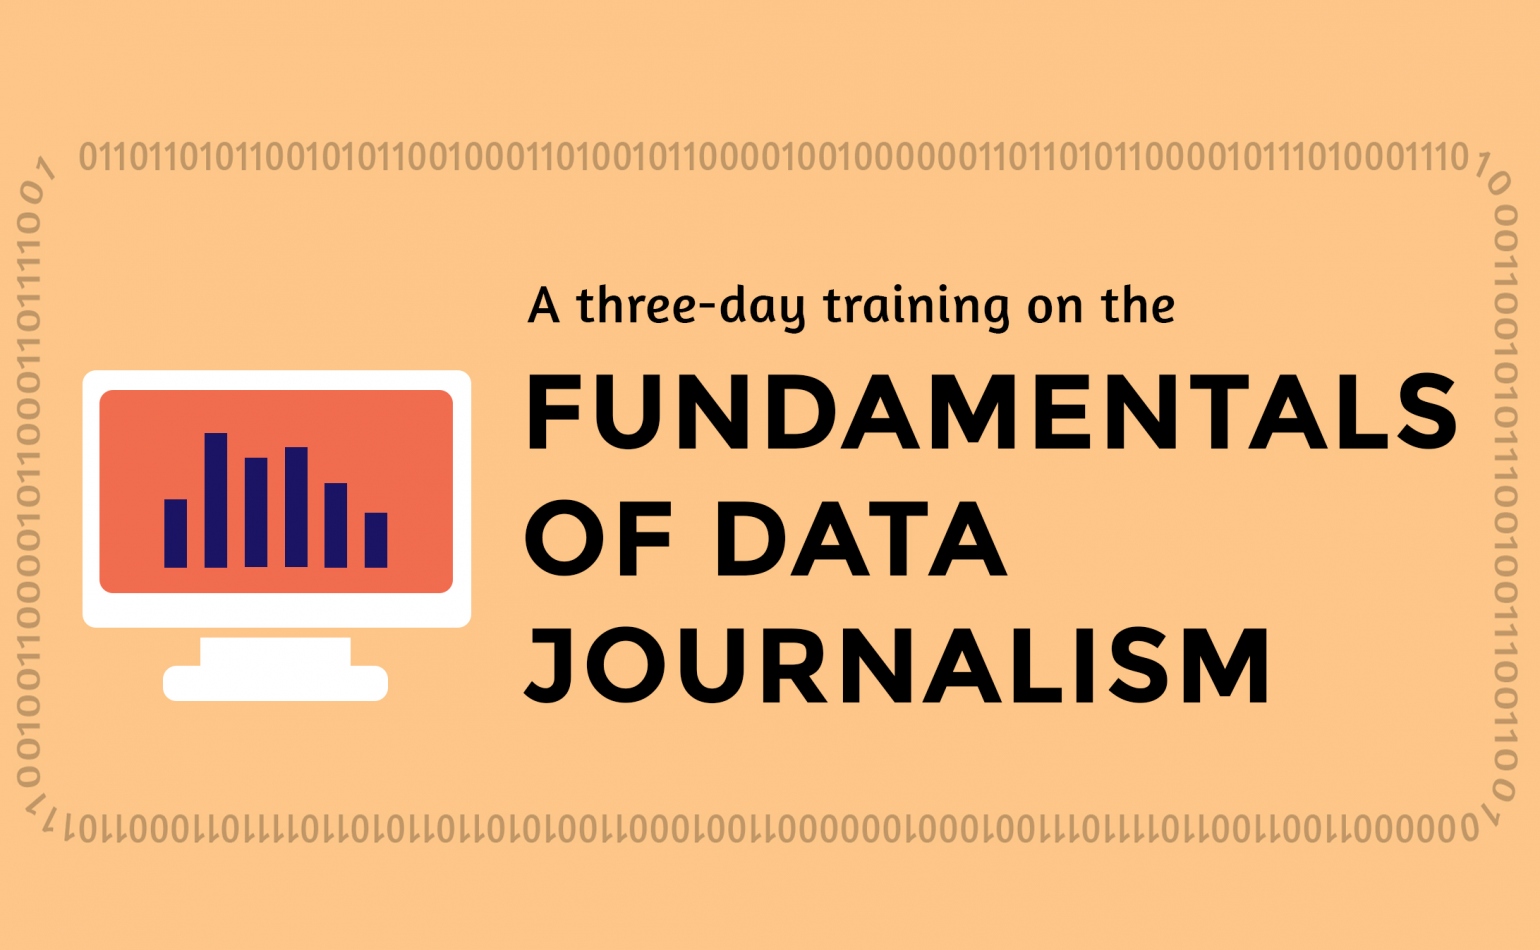 #MediaForTransparency: Media Matters for Democracy launches a three-day data journalism course for journalists in Islamabad, Rawalpindi, Peshawar, Lahore and Karachi. Interested? Register now!